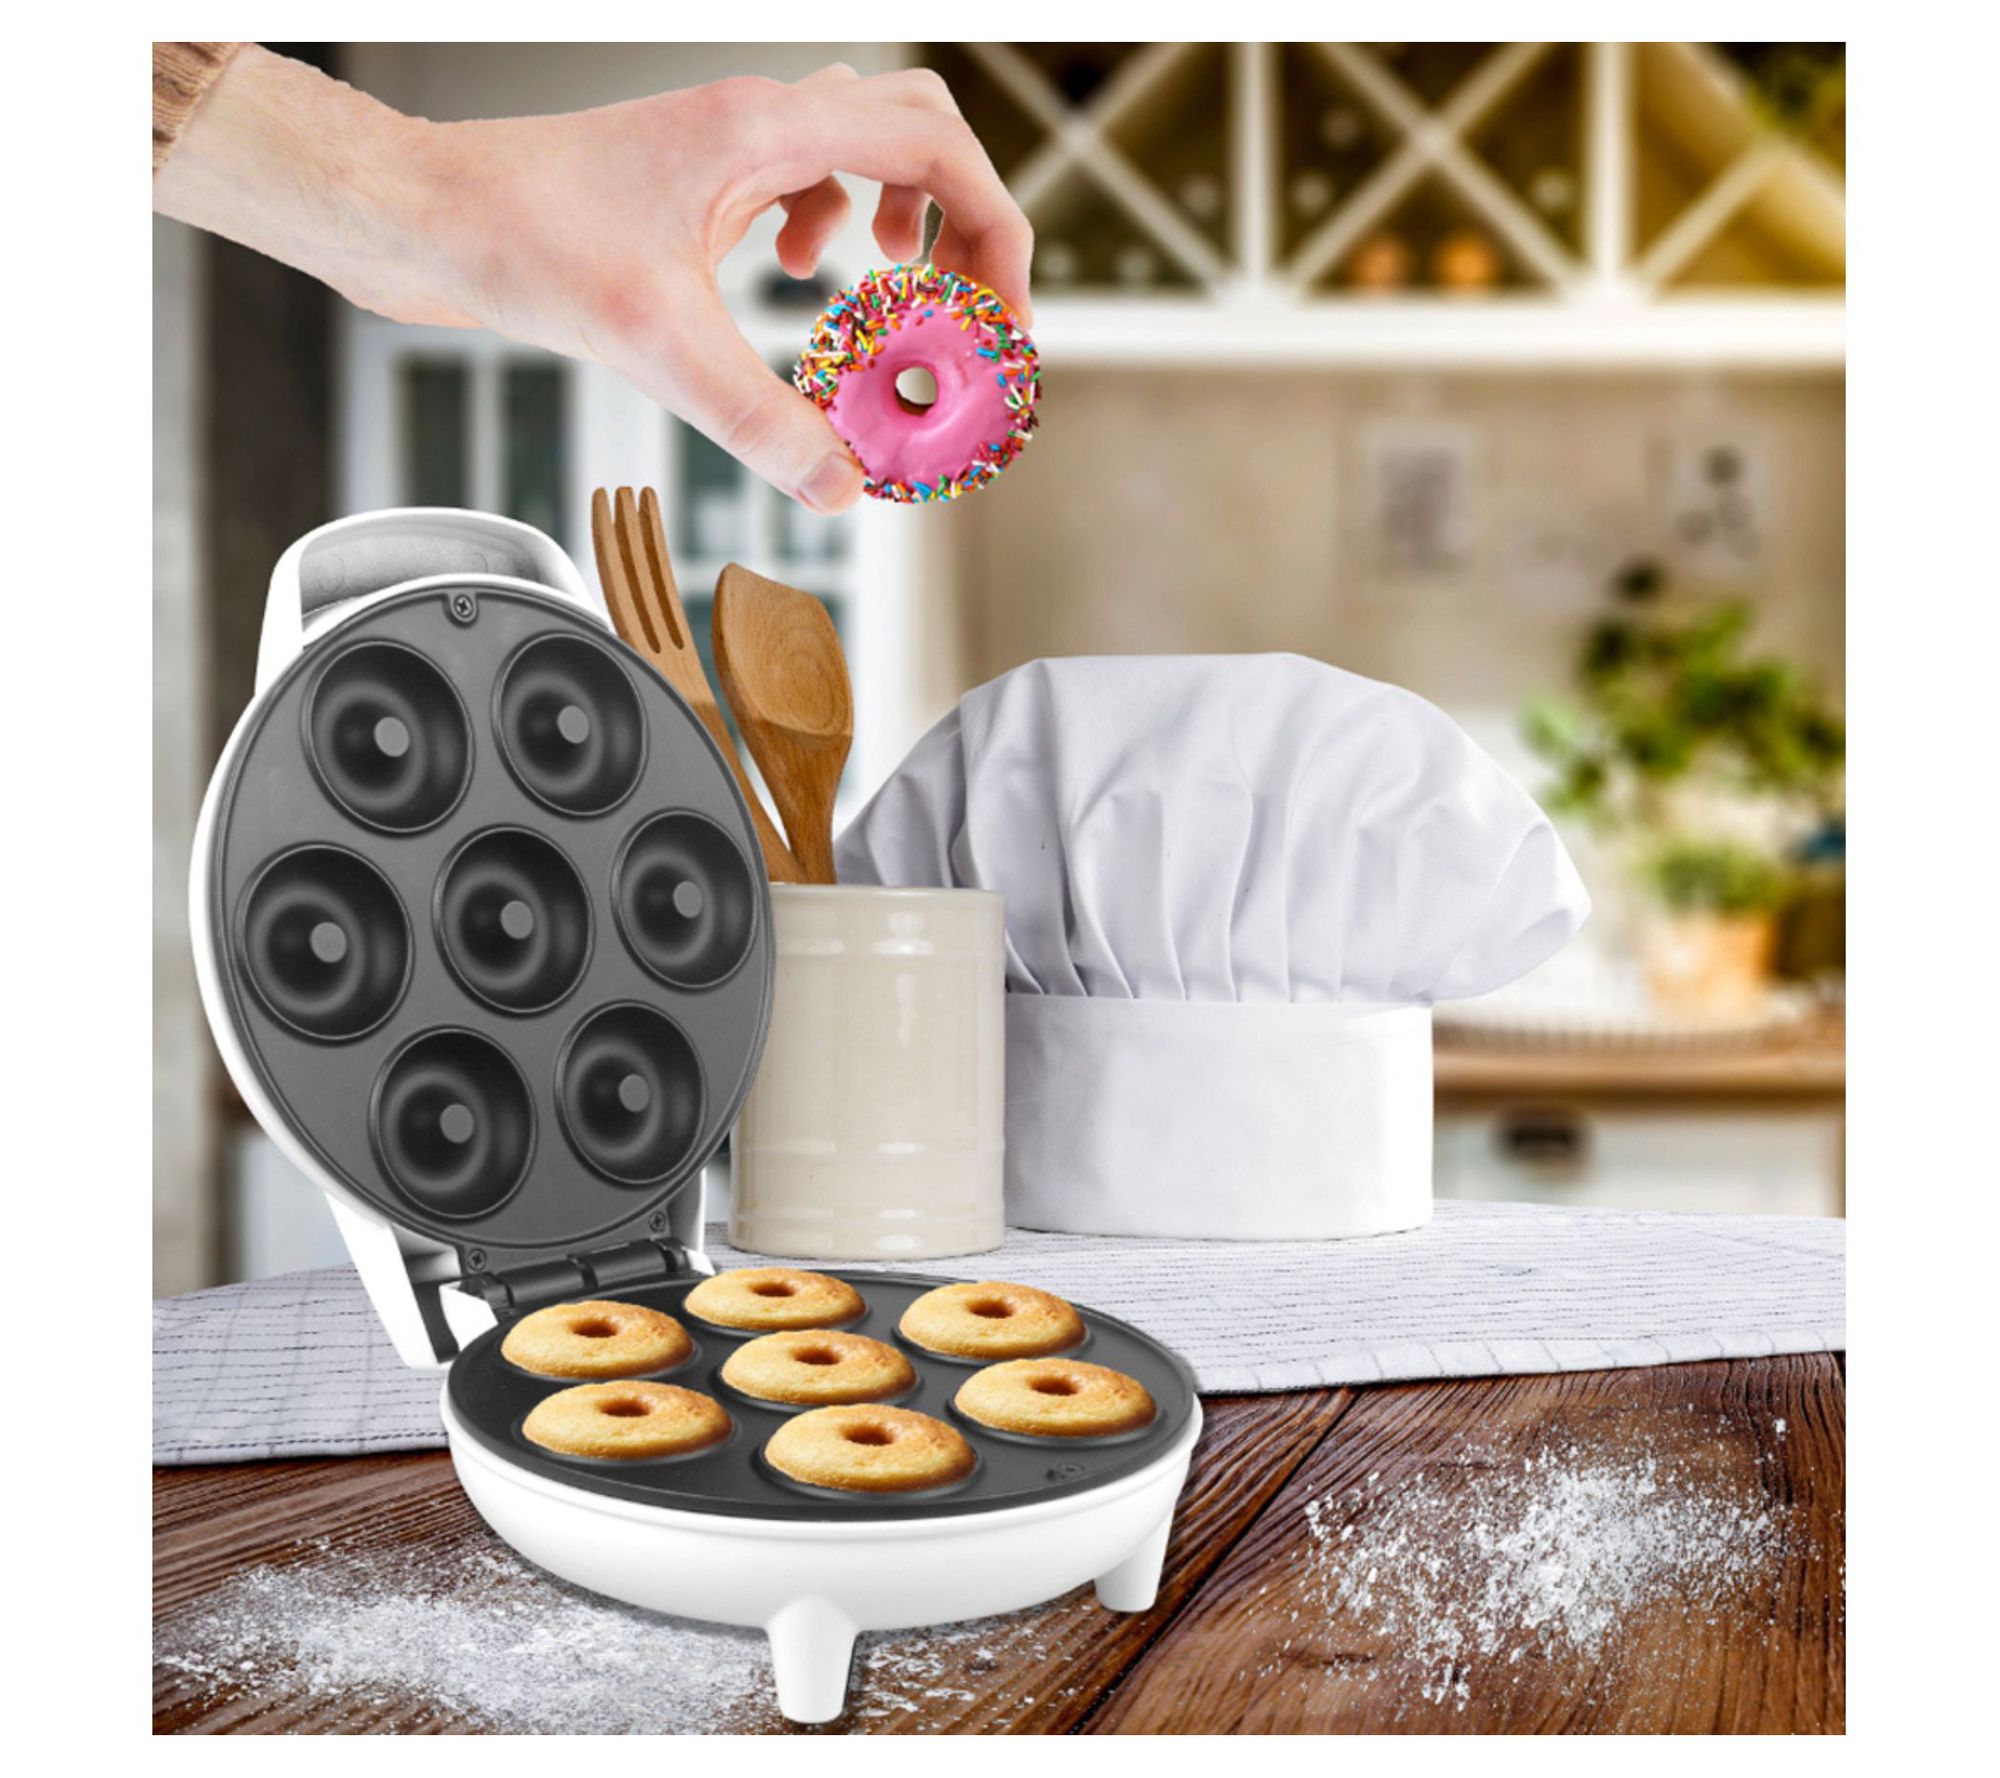 Courant Mini Donut Maker (white) With Food Board Included : Target